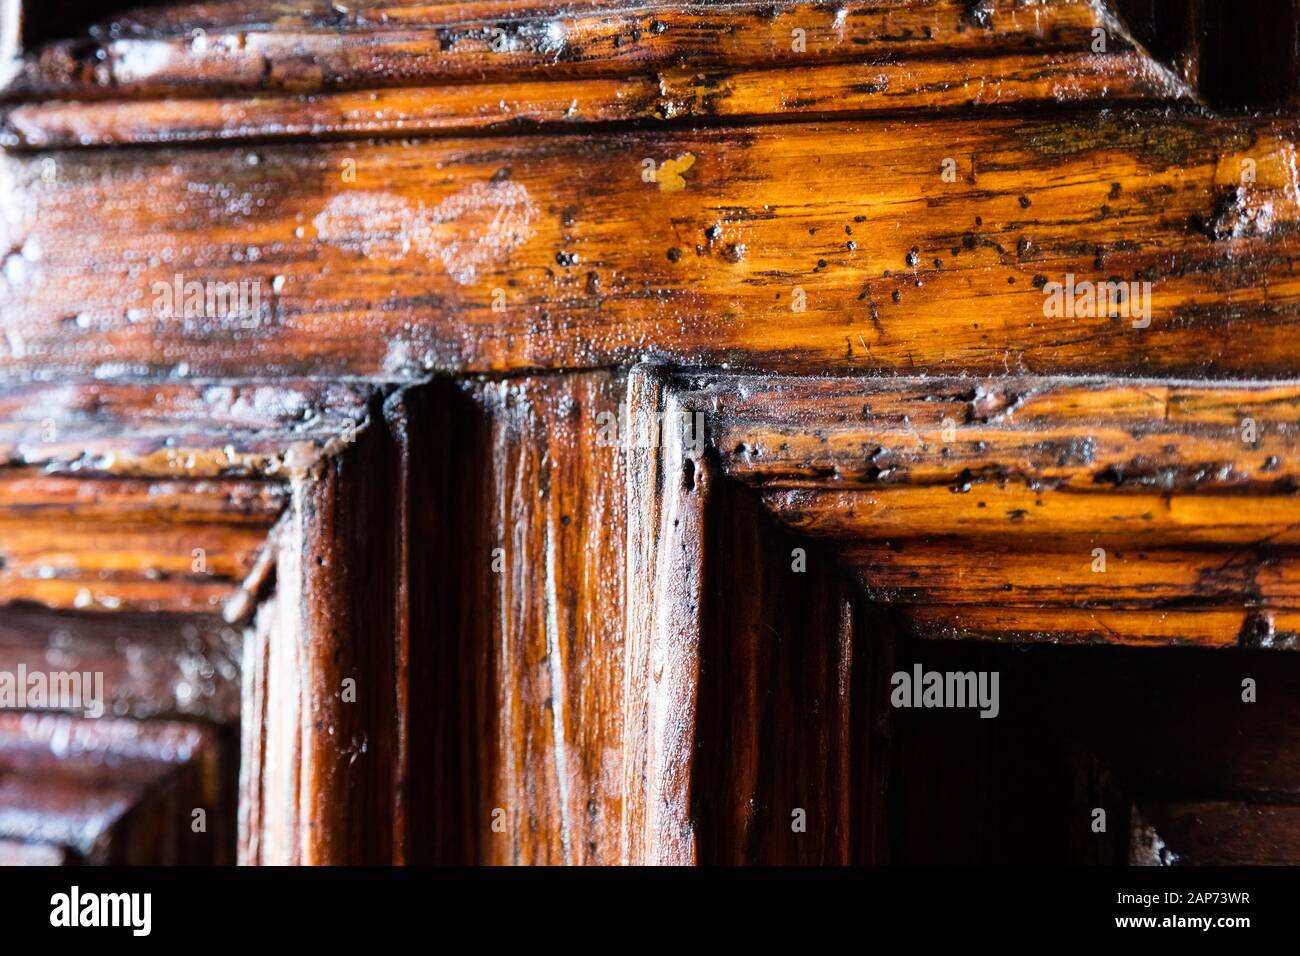 Old wood texture with the woodworm holes Stock Photo